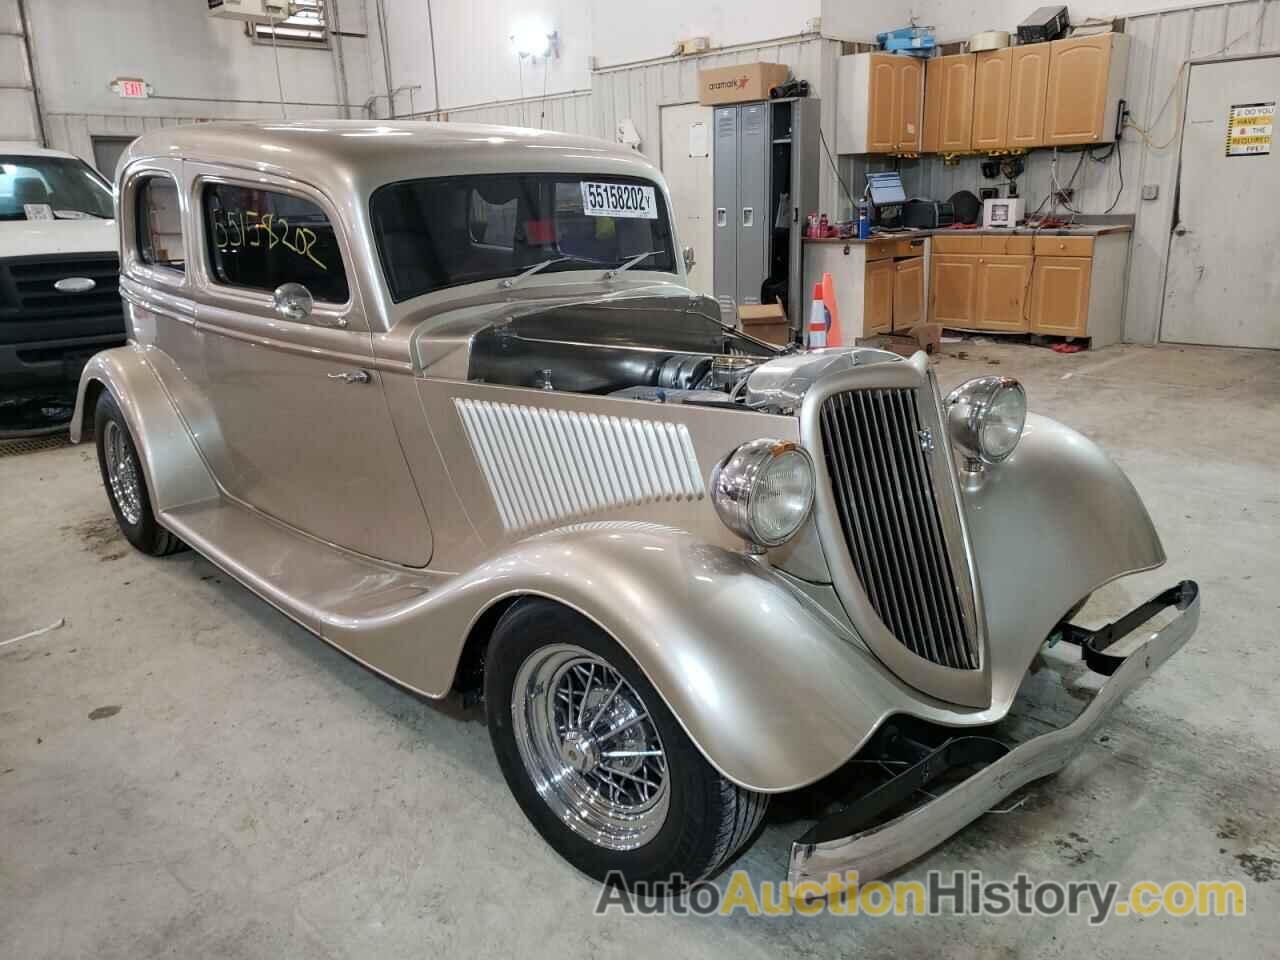 1933 FORD COUPE, 182494661